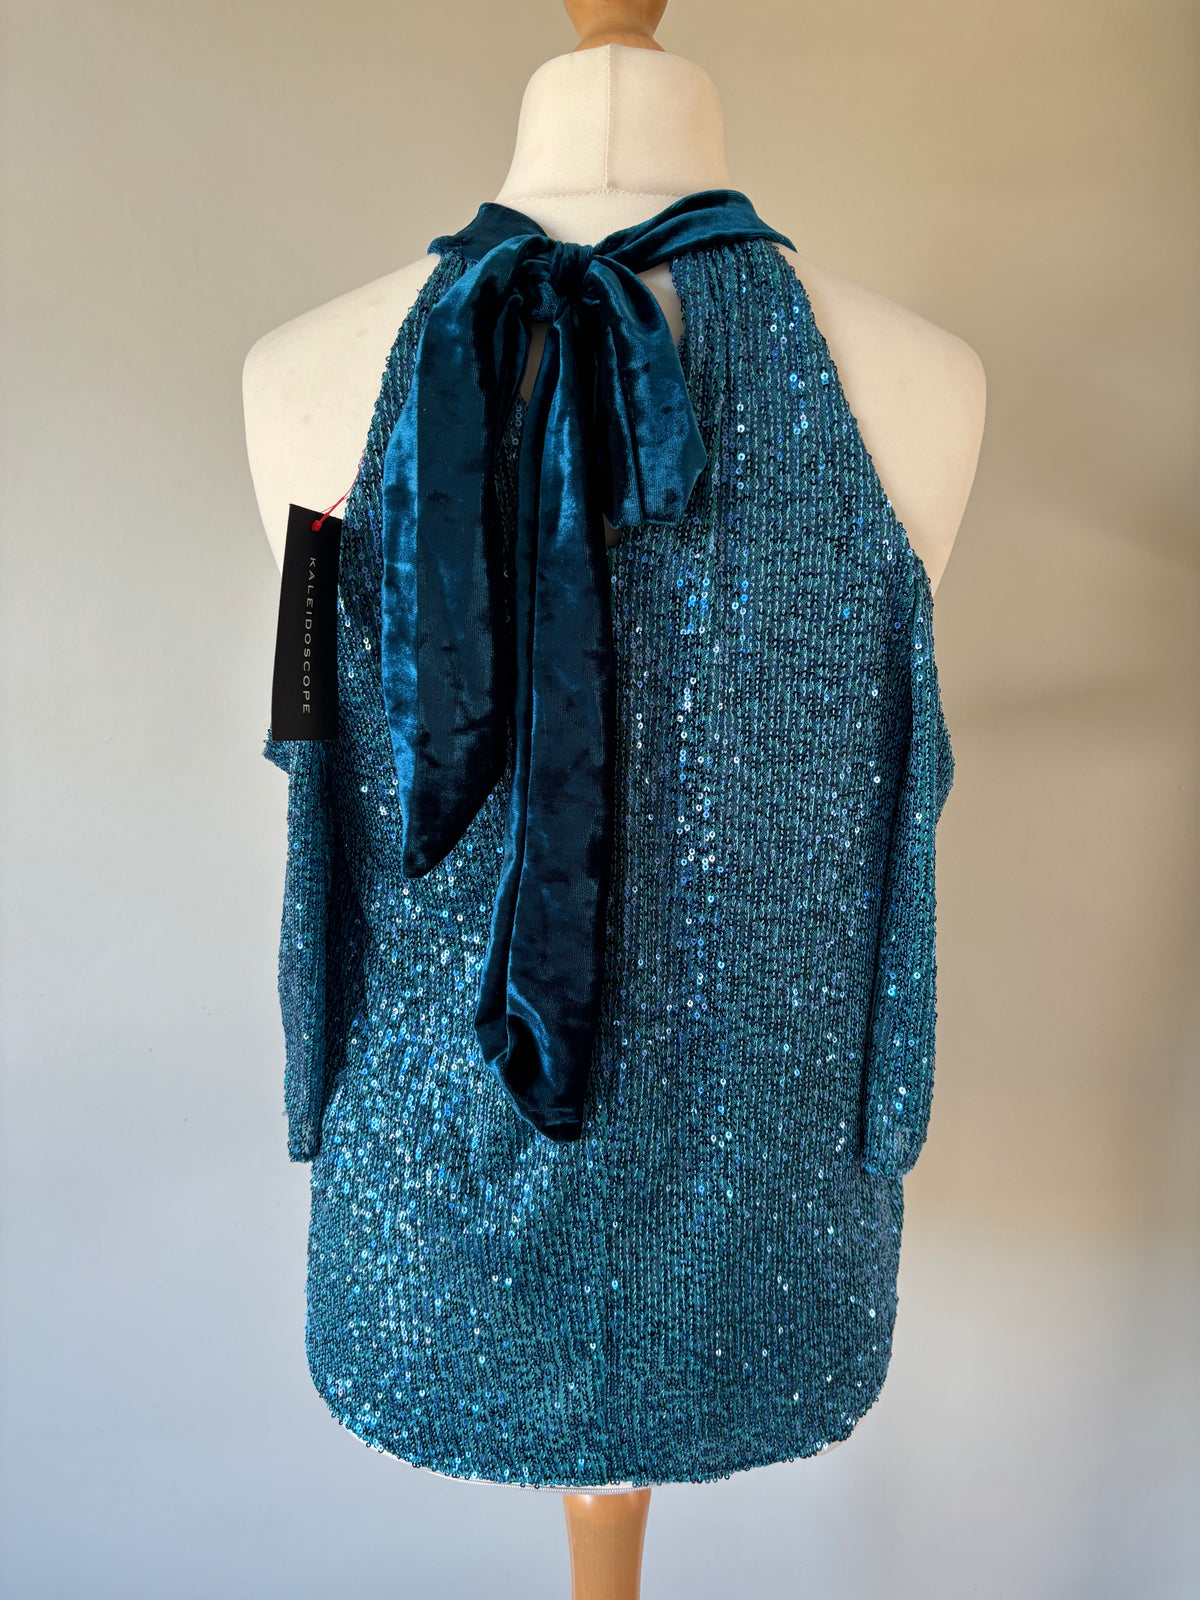 Blue Sequin Cold Shoulder Top by Kaleidoscope Size 14